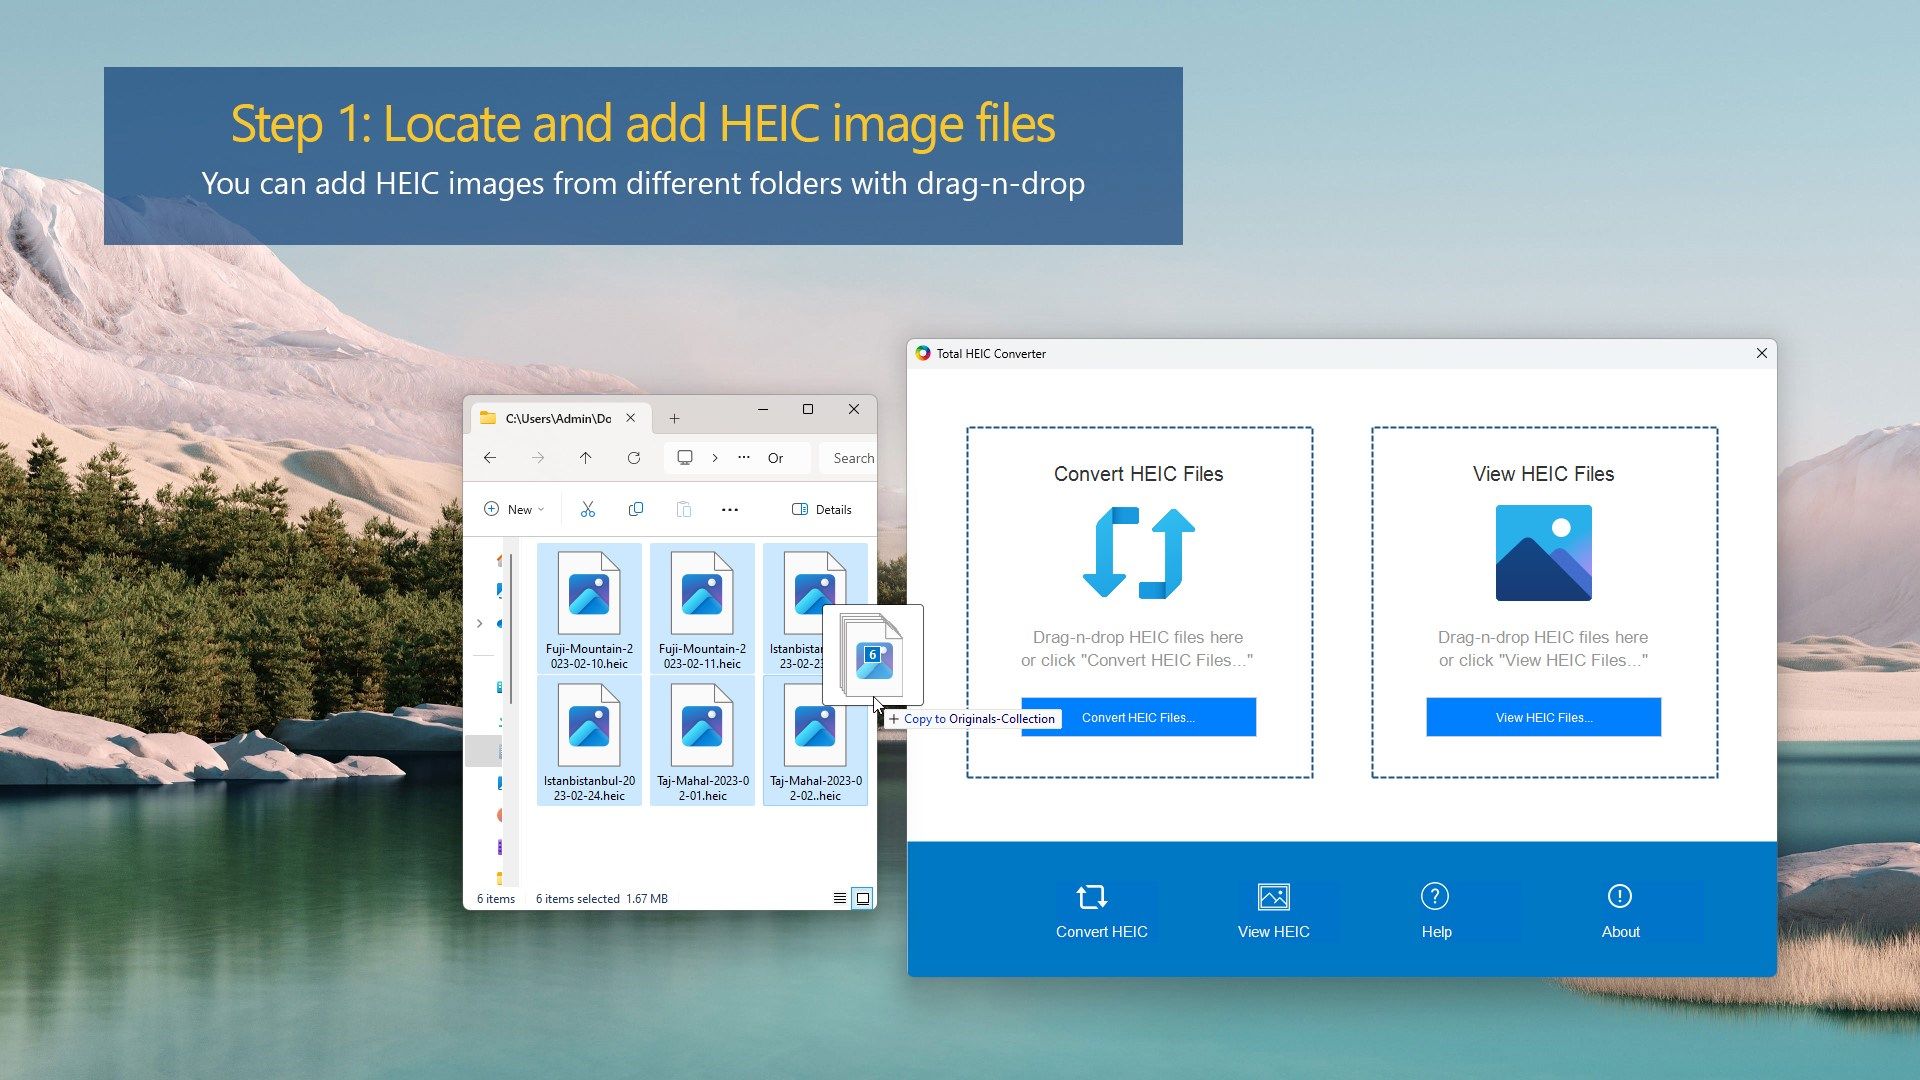 Total HEIC Converter - HEIC to JPG, HEIC to PNG